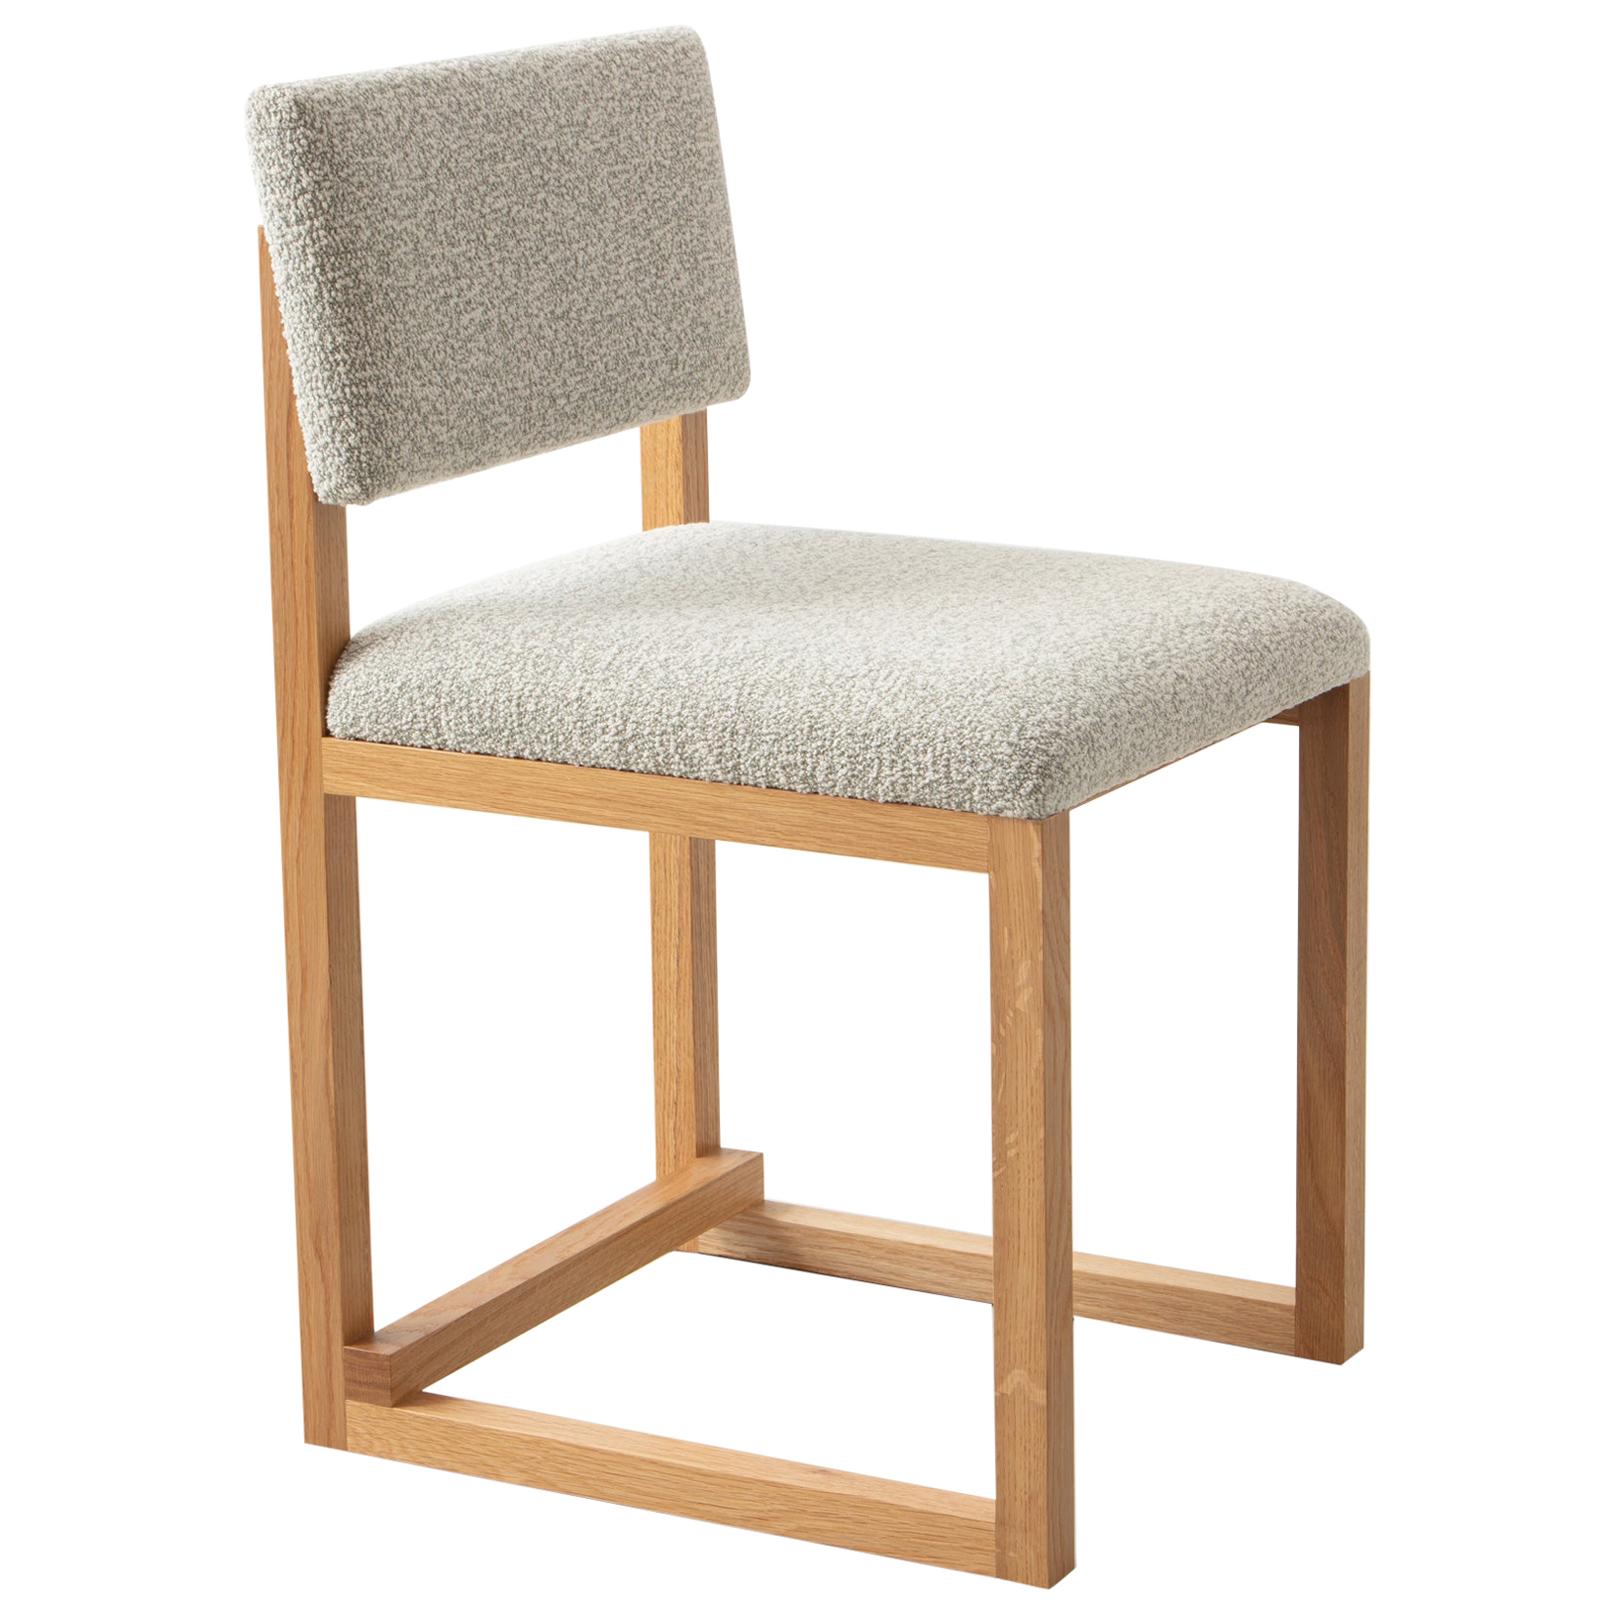 SQ Upholstered Dining Chair, White Oak, Brass, Bouclé or COM, Handmade in USA